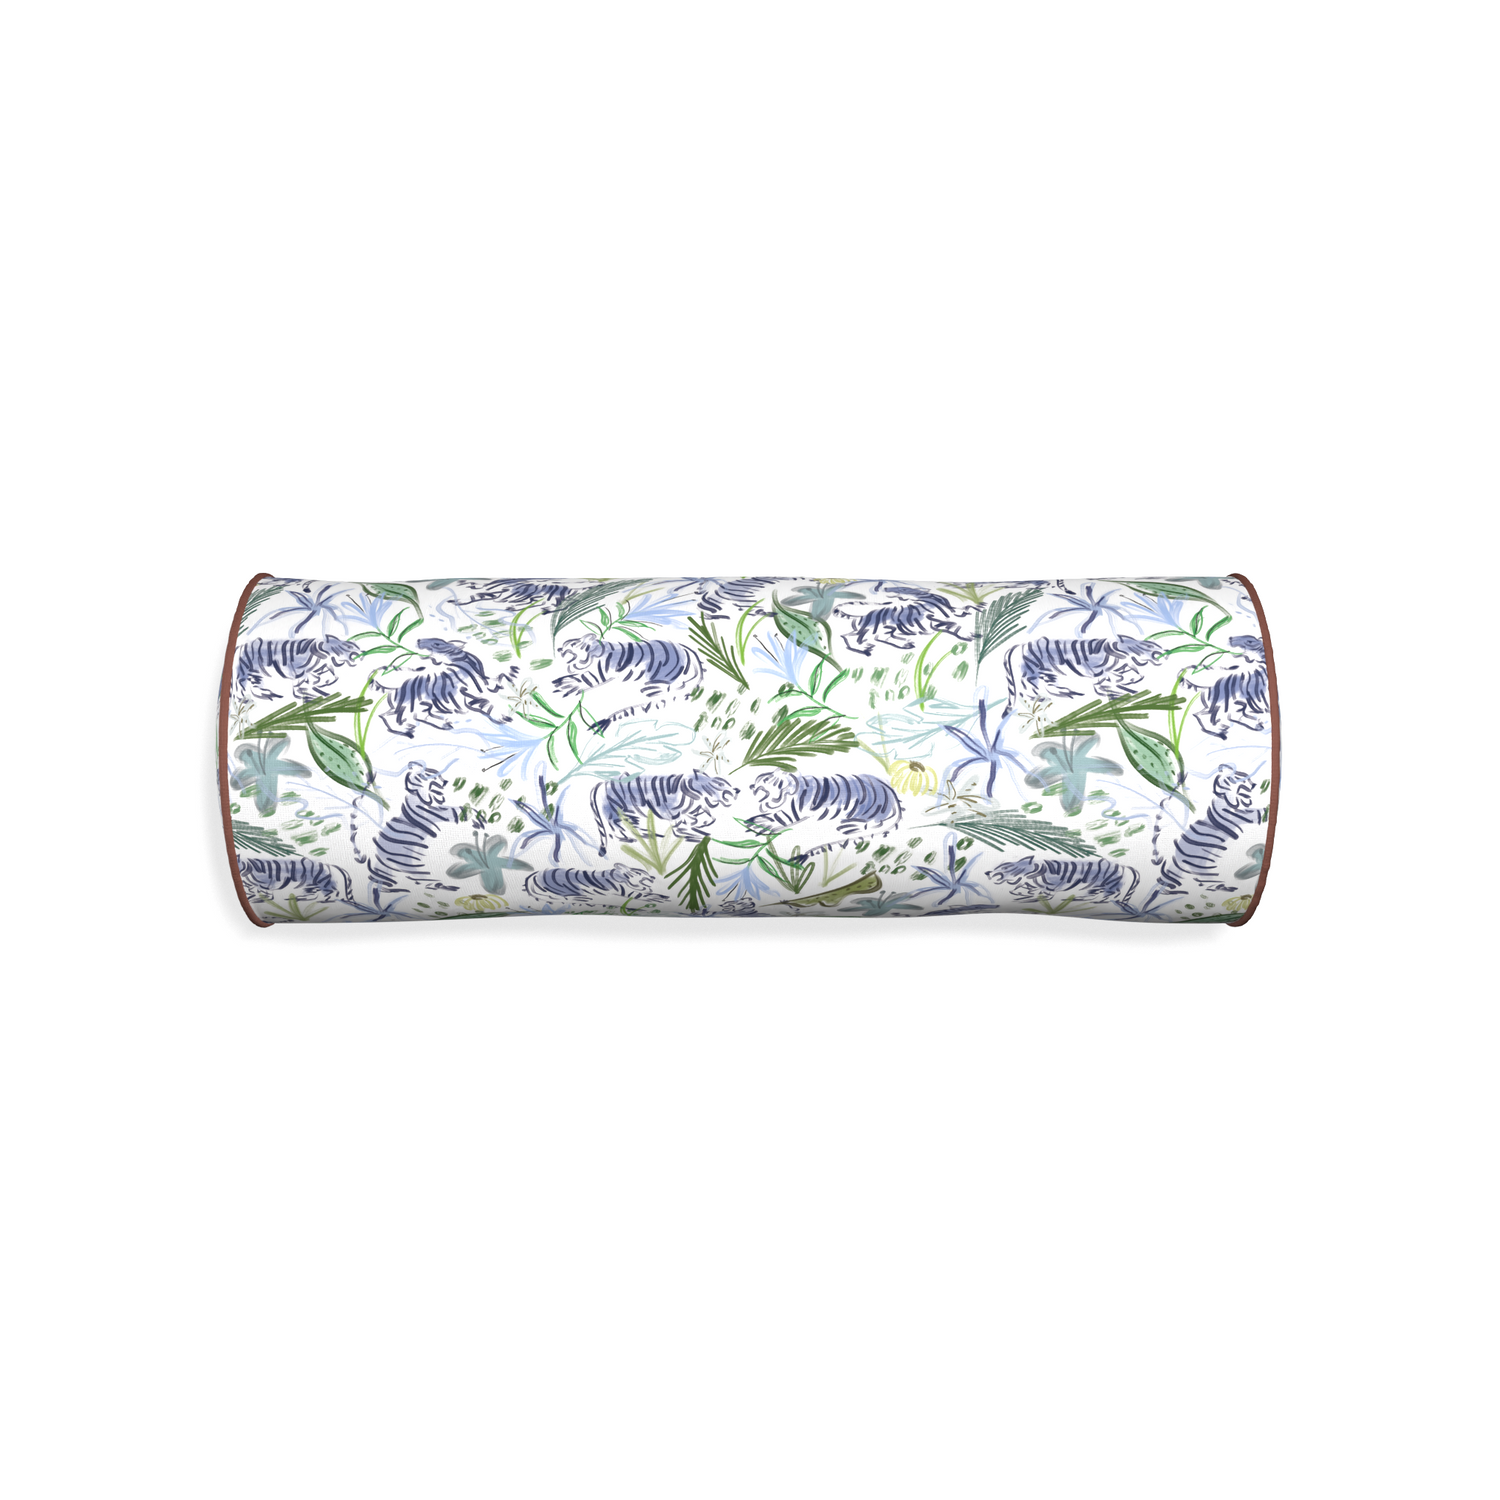 Bolster frida green custom green tigerpillow with w piping on white background